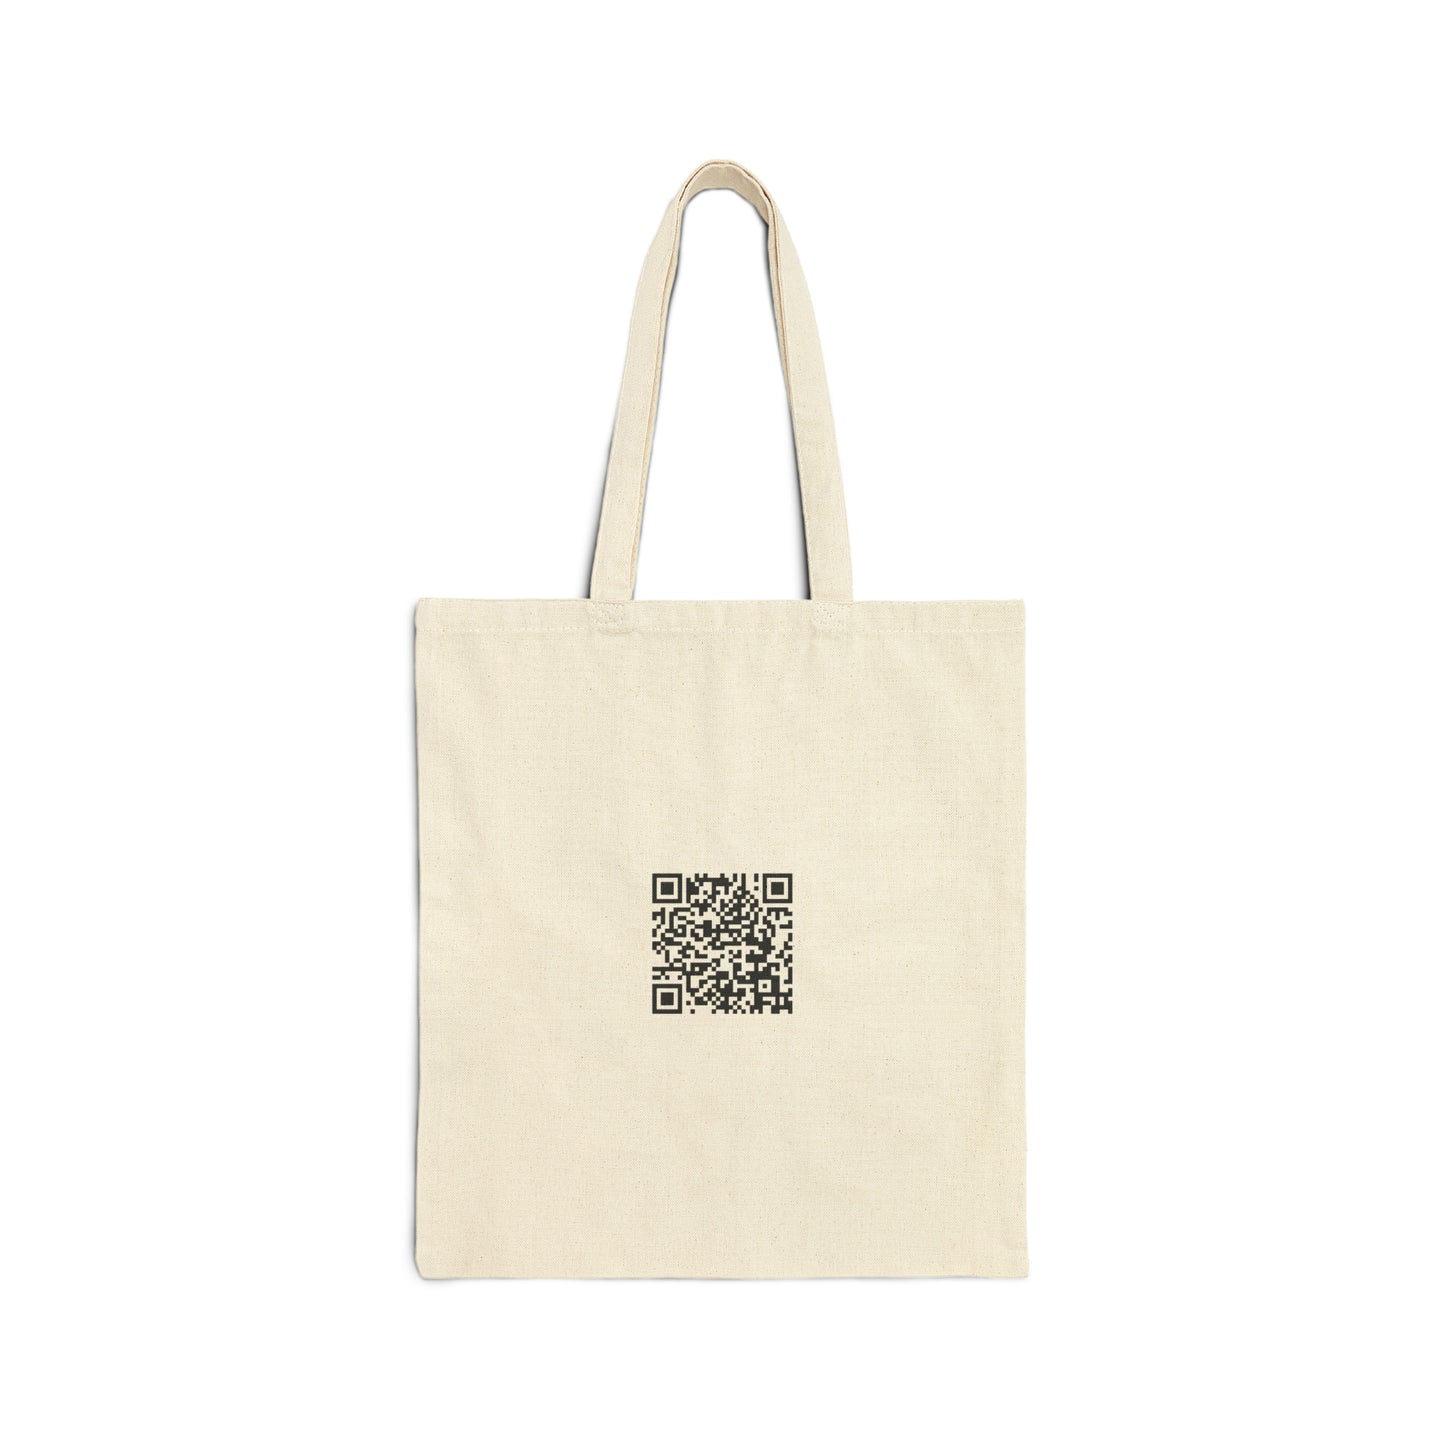 Magic In The African Bush - Cotton Canvas Tote Bag